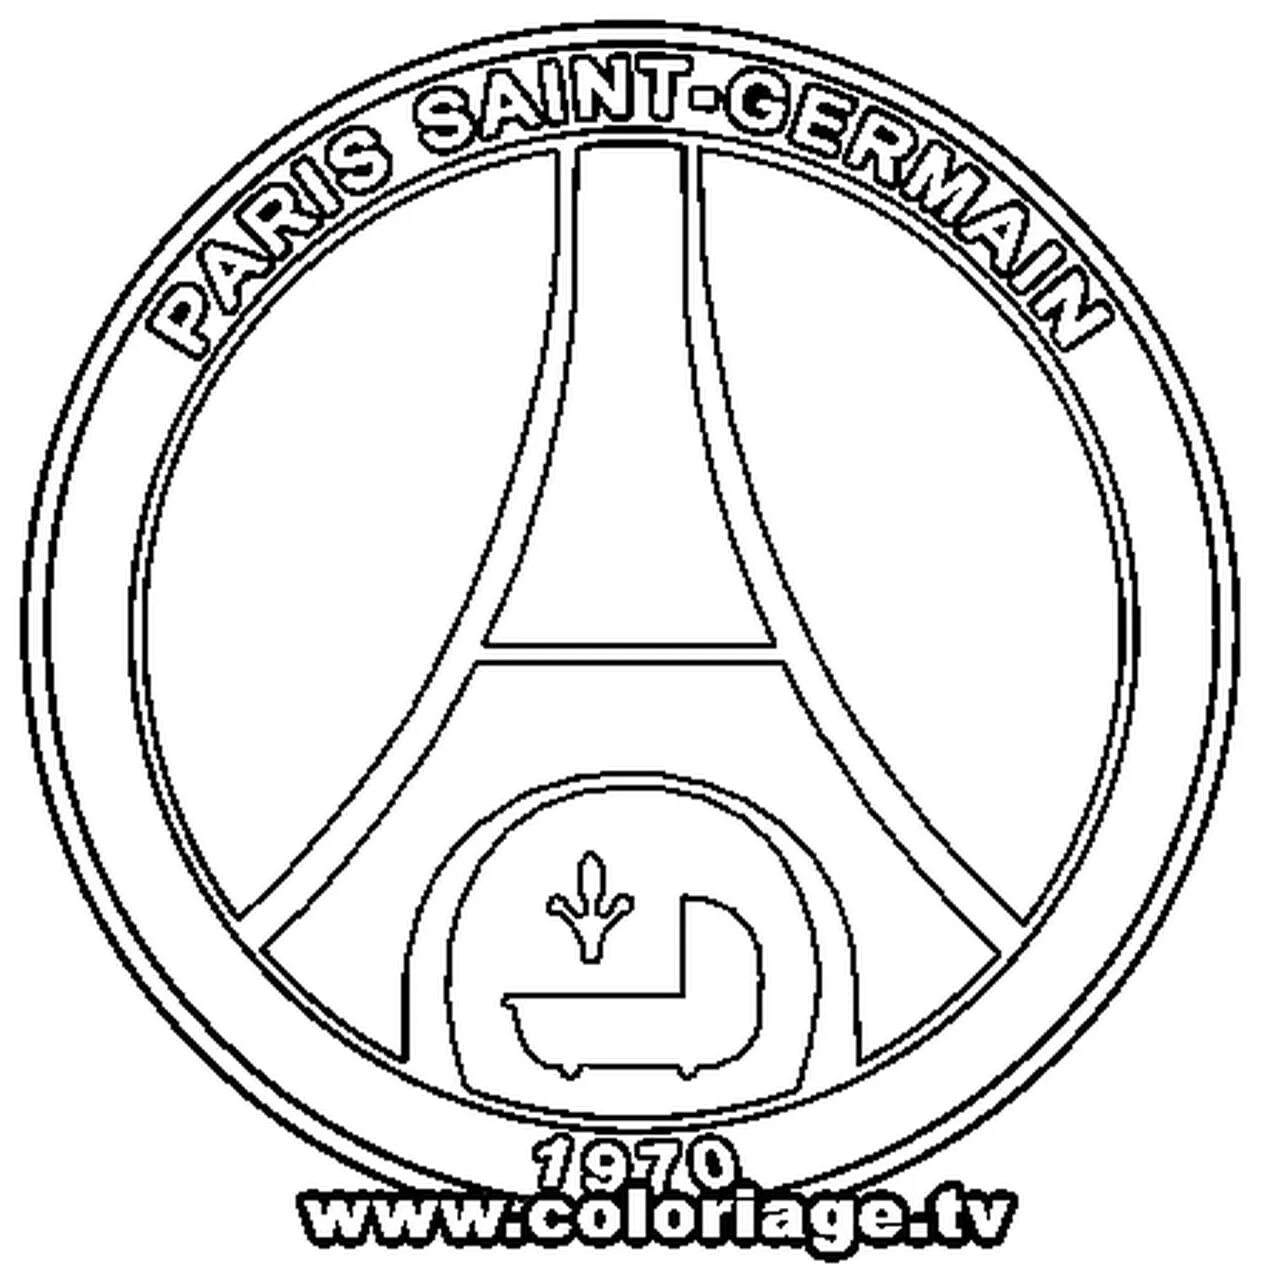 Amazing psg coloring page